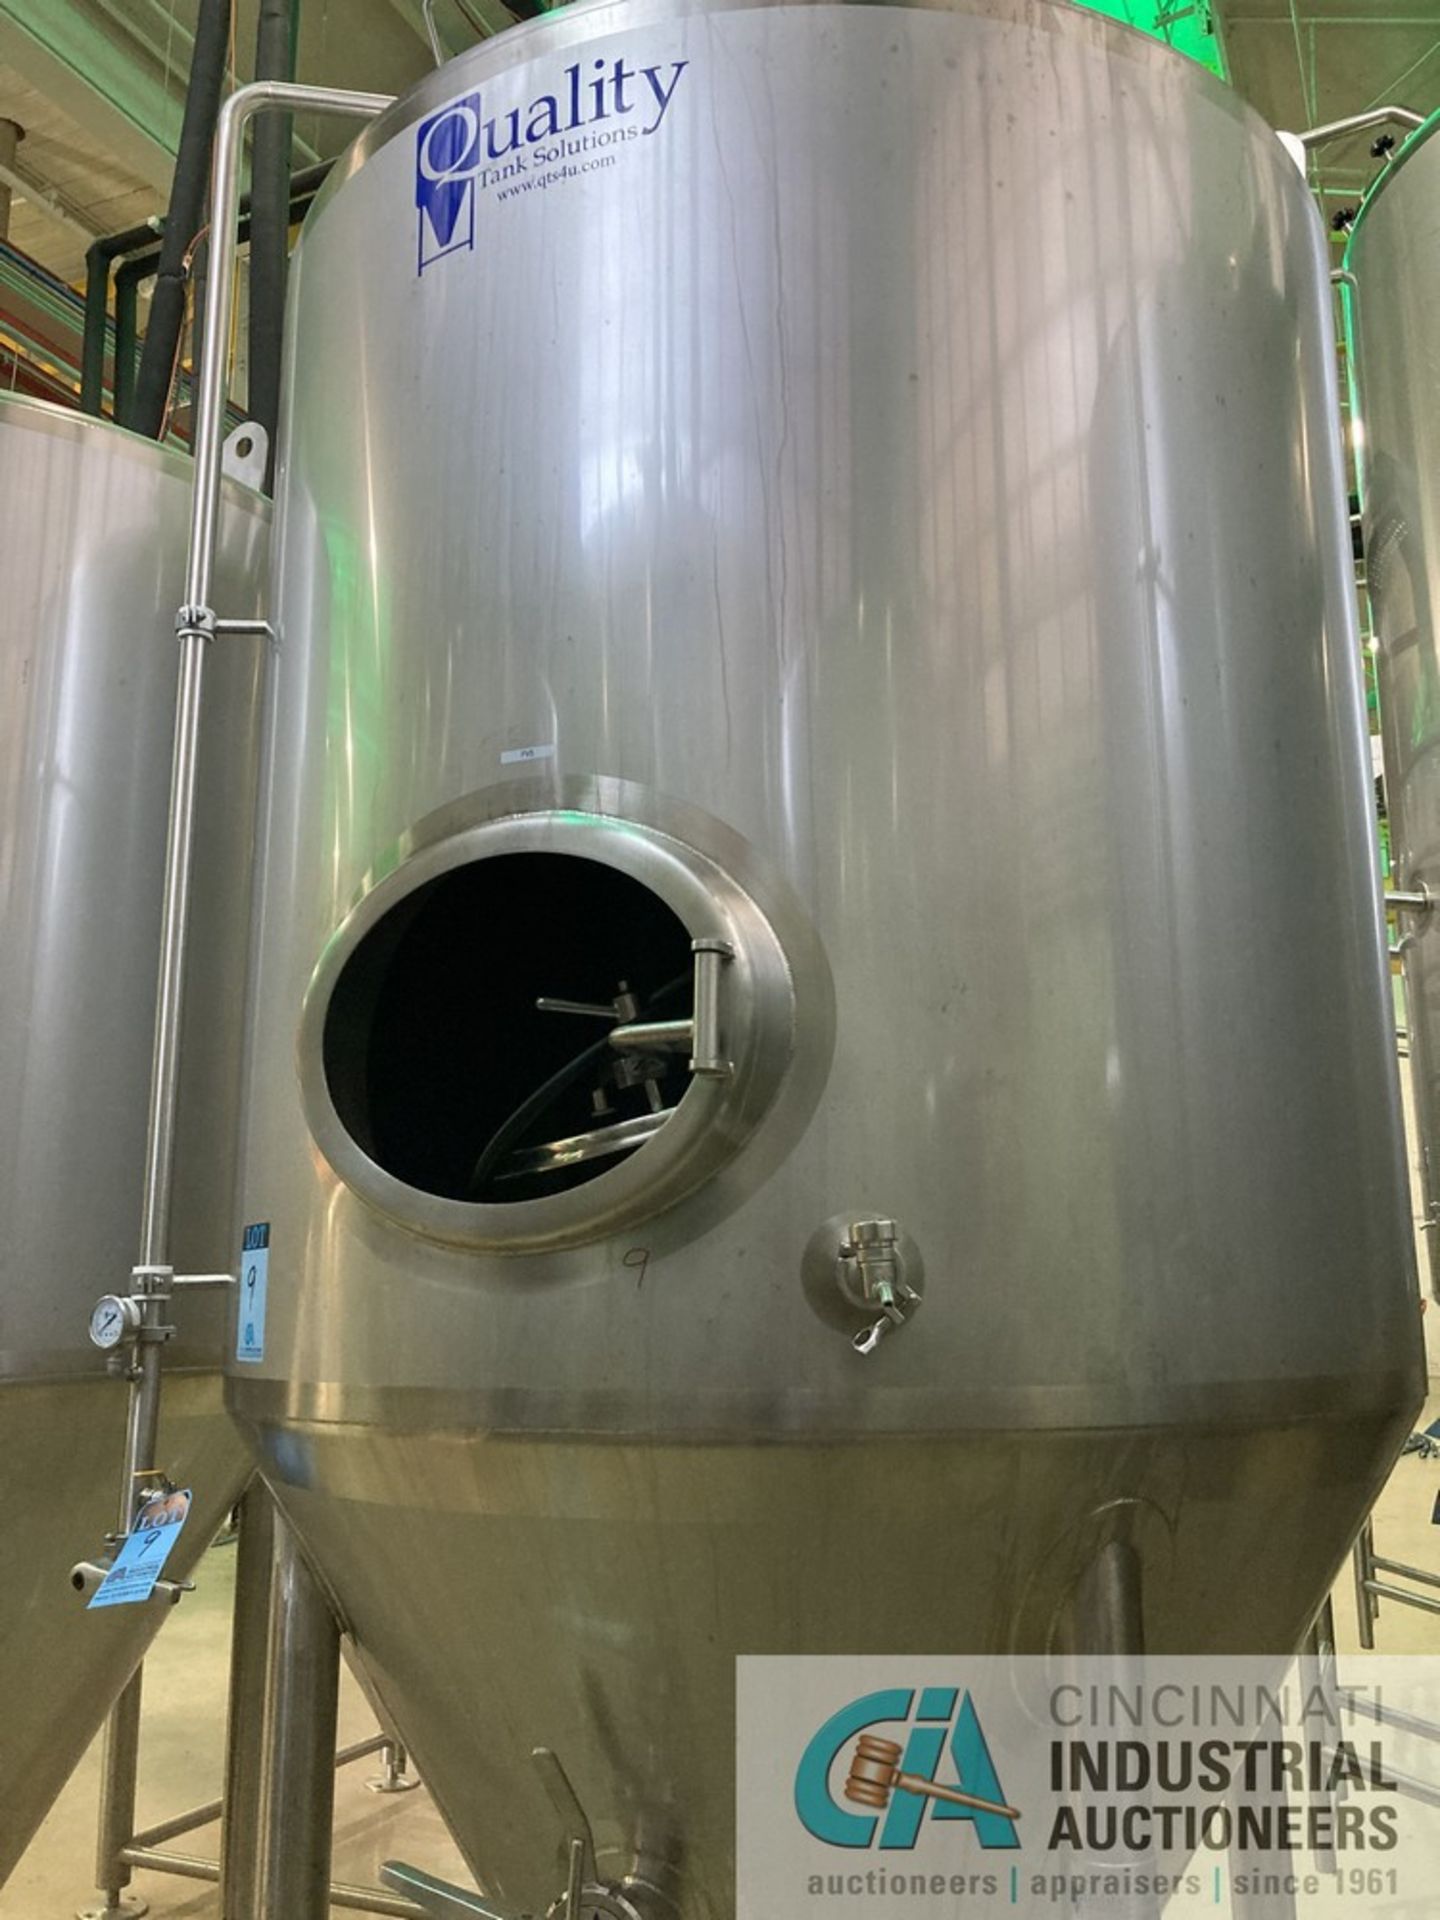 20 BBL QTS SOLUTIONS FV1 FERMENTER TANK AT 61-3/16" DIAMETER X 133" HIGH, INCLUDES SADDLES **For